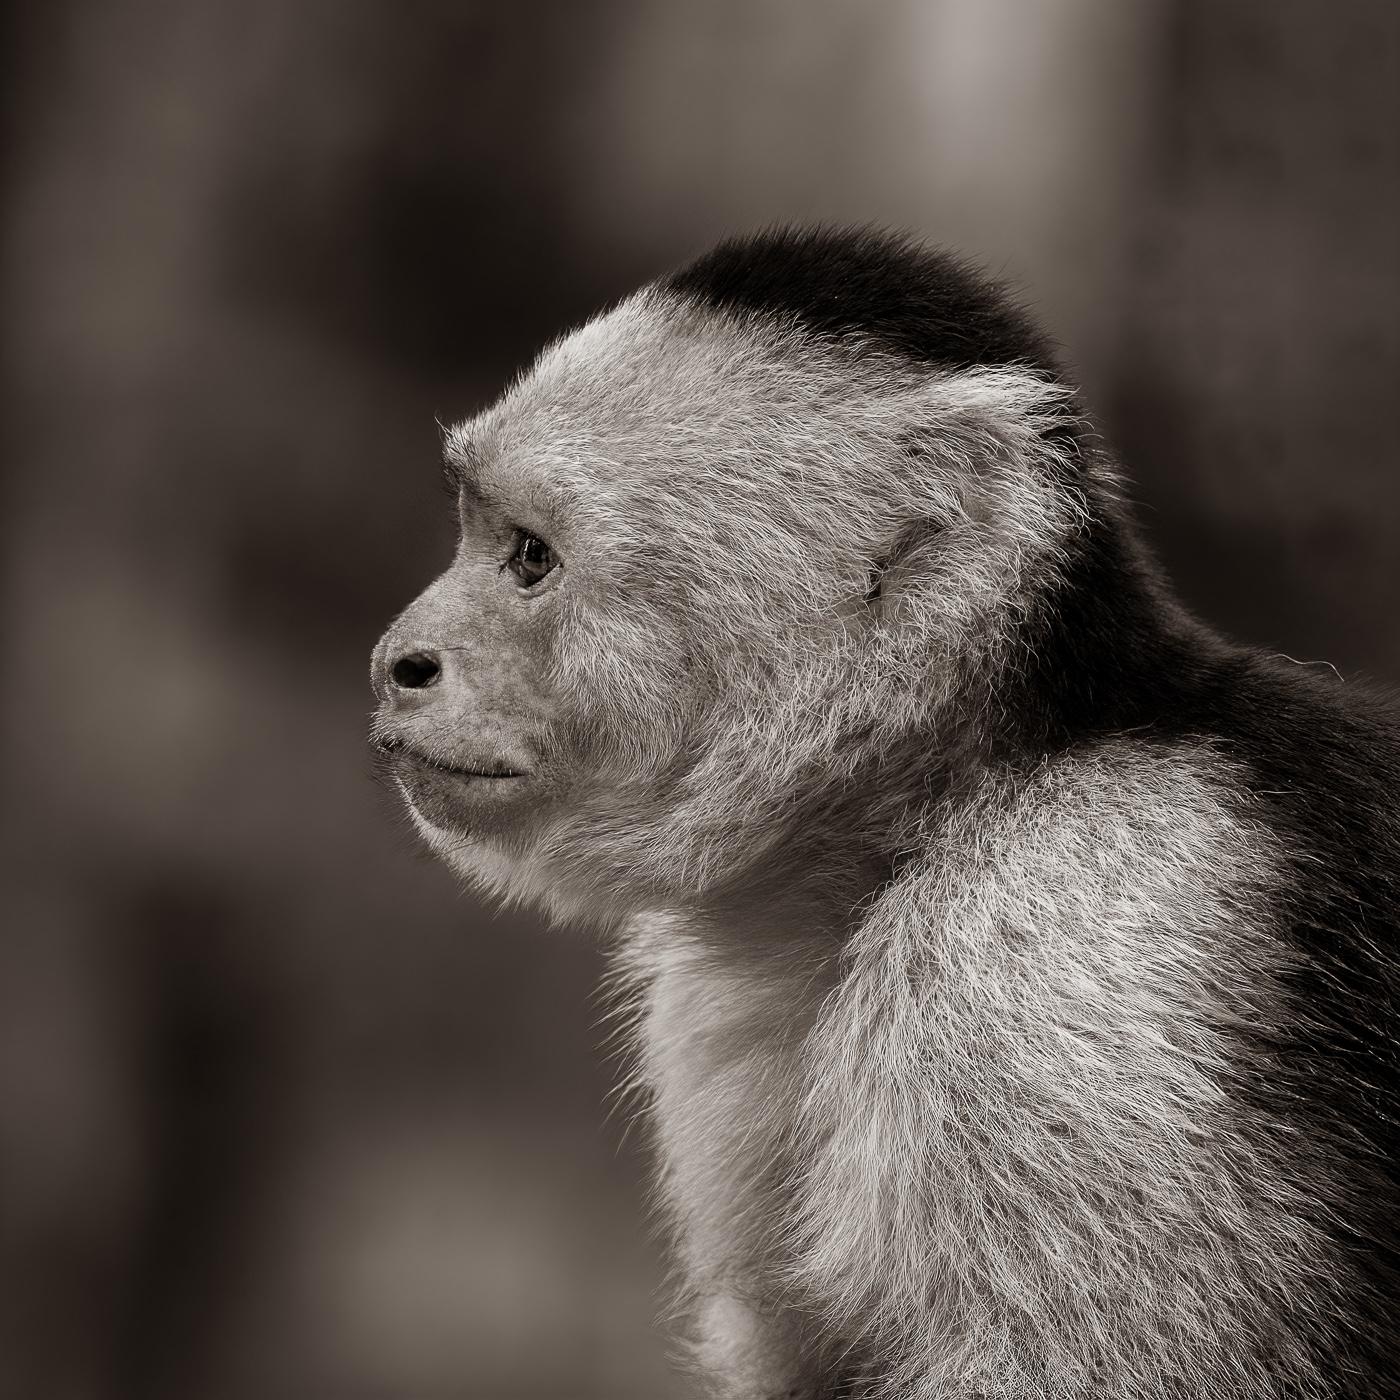 1st PrizeOpen Mono In Class 3 By Edward Crawford For Capuchin Portrait OCT-2021.jpg